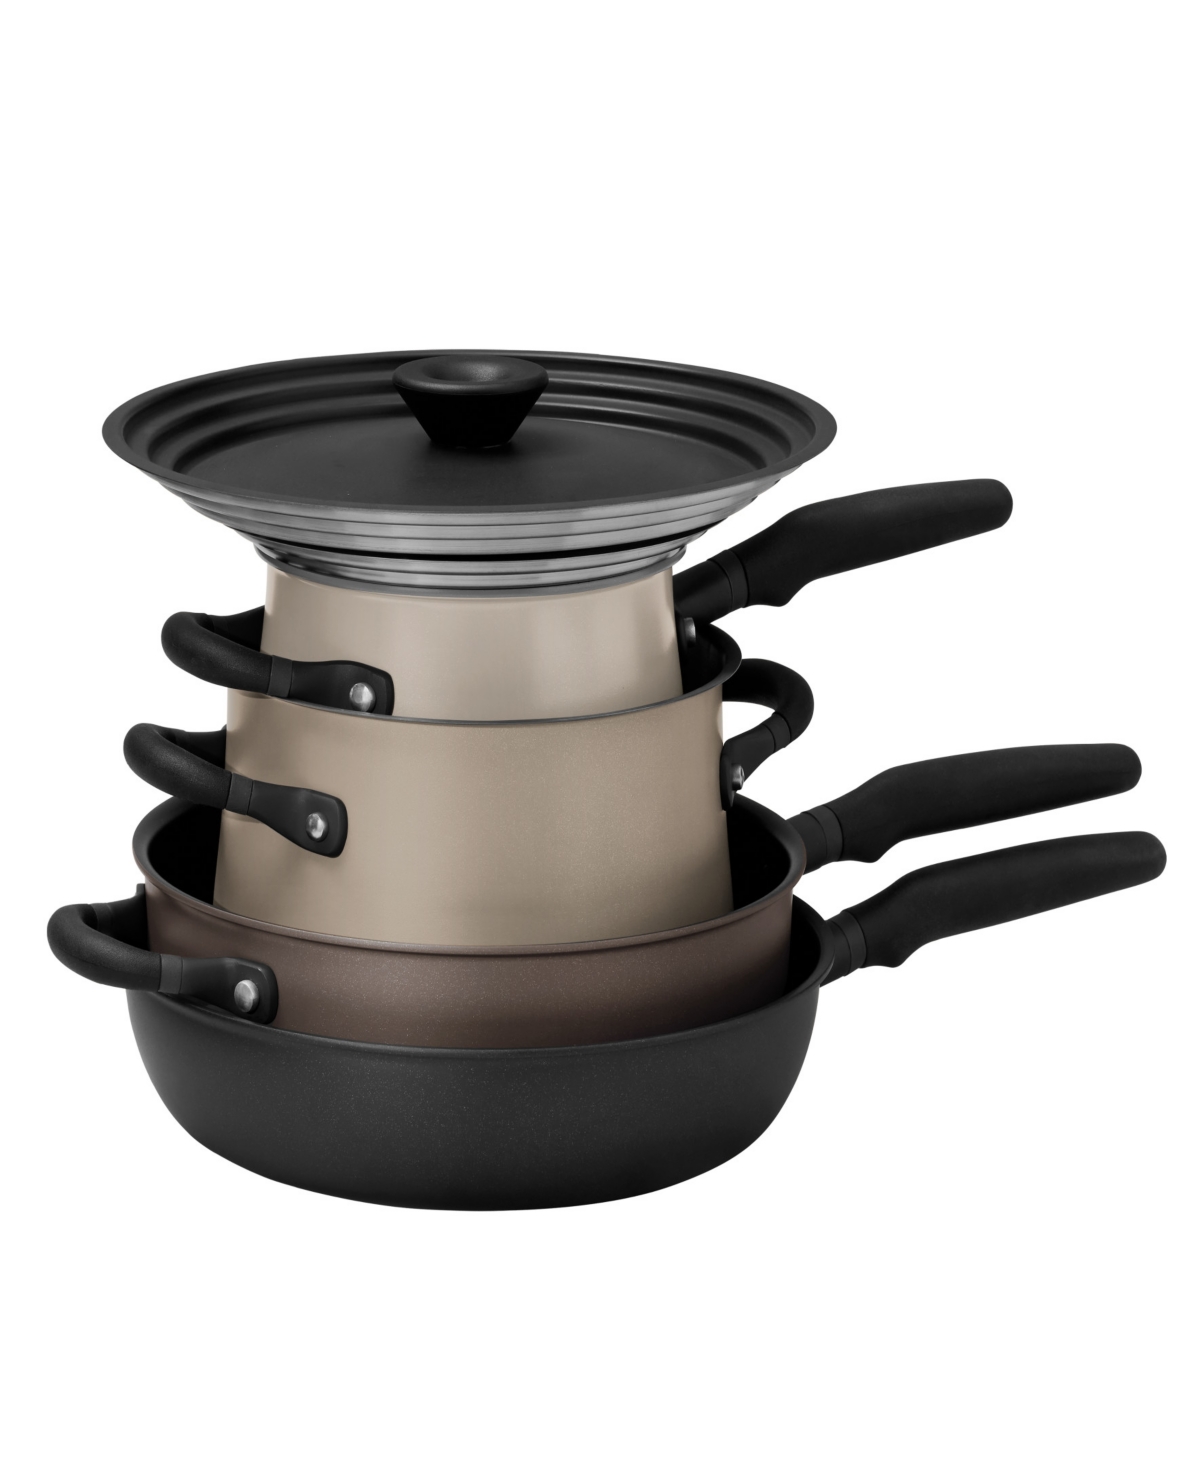 Meyer Accent Series Non-stick And Stainless Steel Cinder And Smoke Edition 6 Piece Induction Cookware Esse In Multi